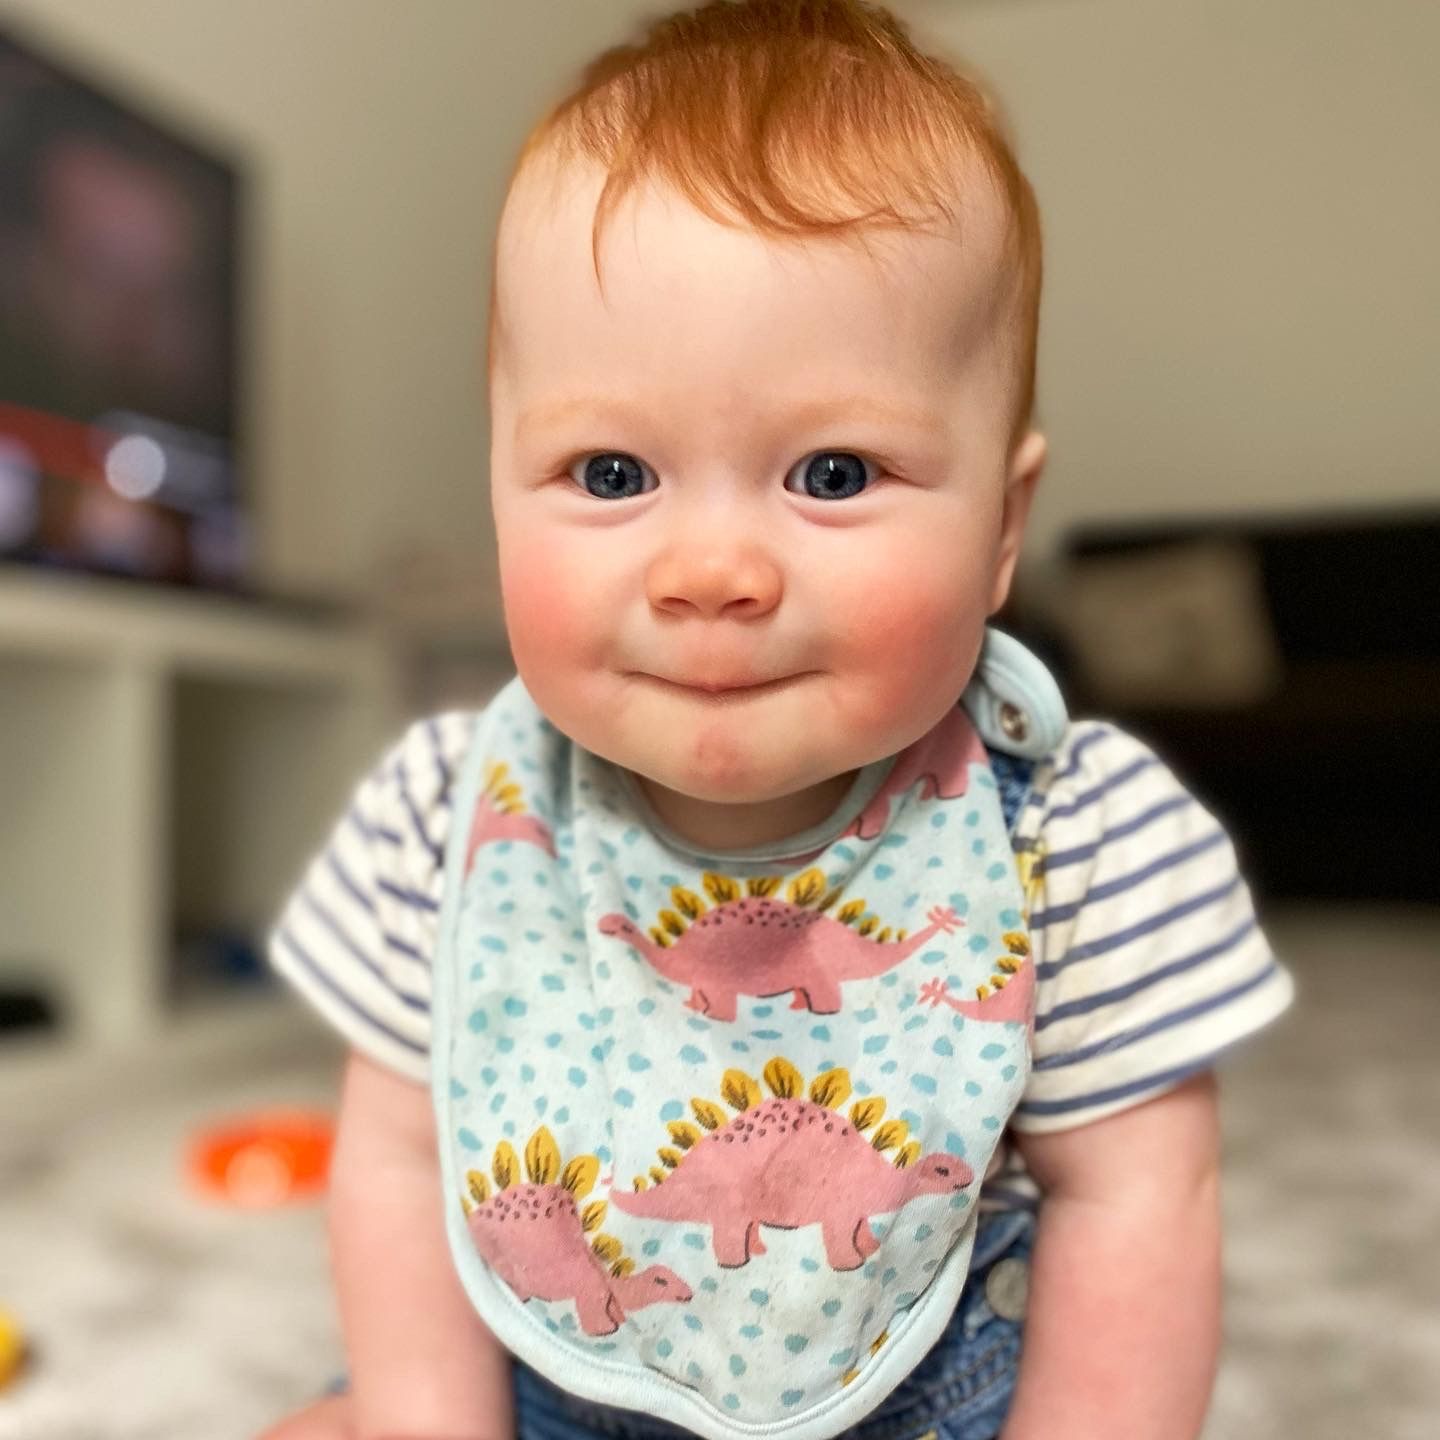 An 8 month old baby with red hair and grey-blue eyes looking at the camera with a coy face